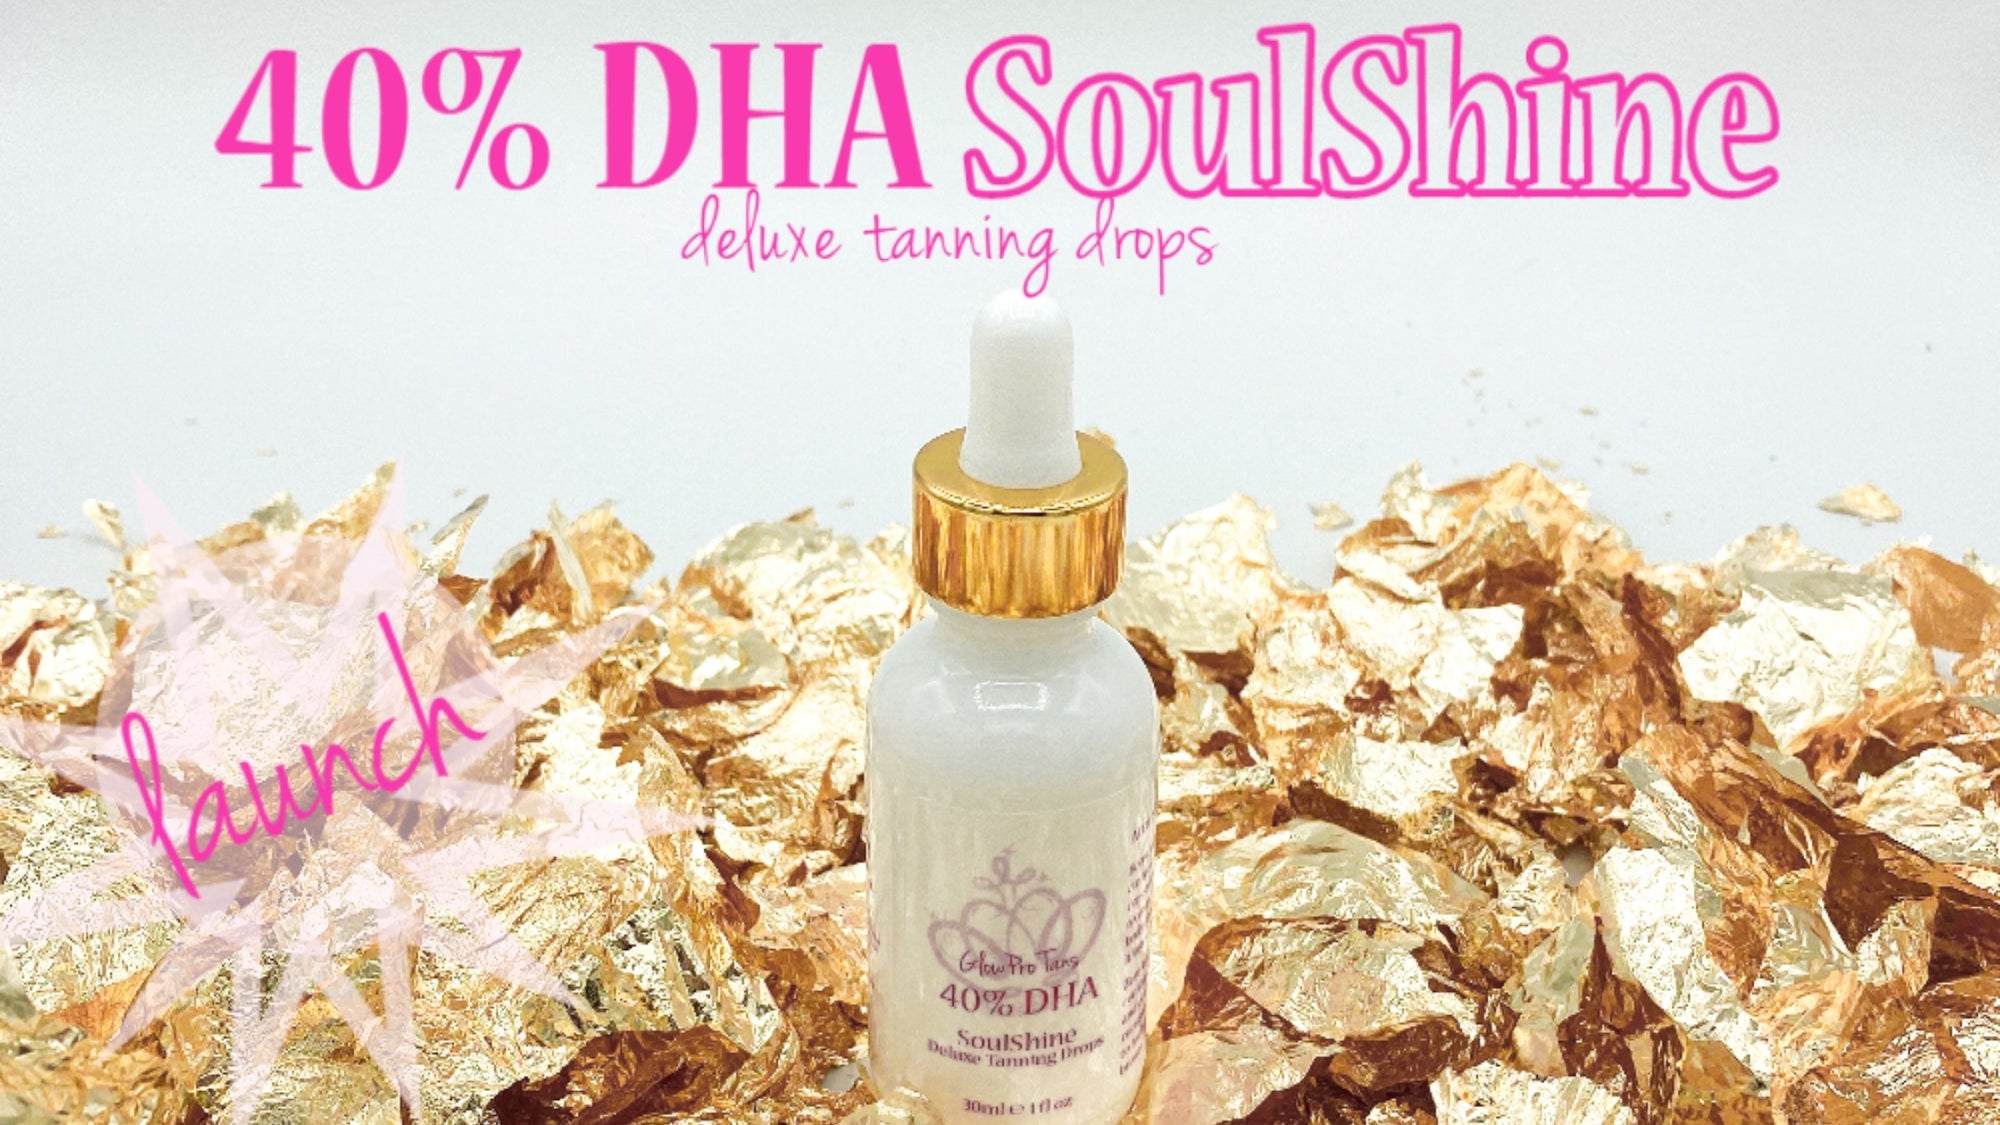 NEW! How to Use SoulShine 40% DHA Tanning Drops!